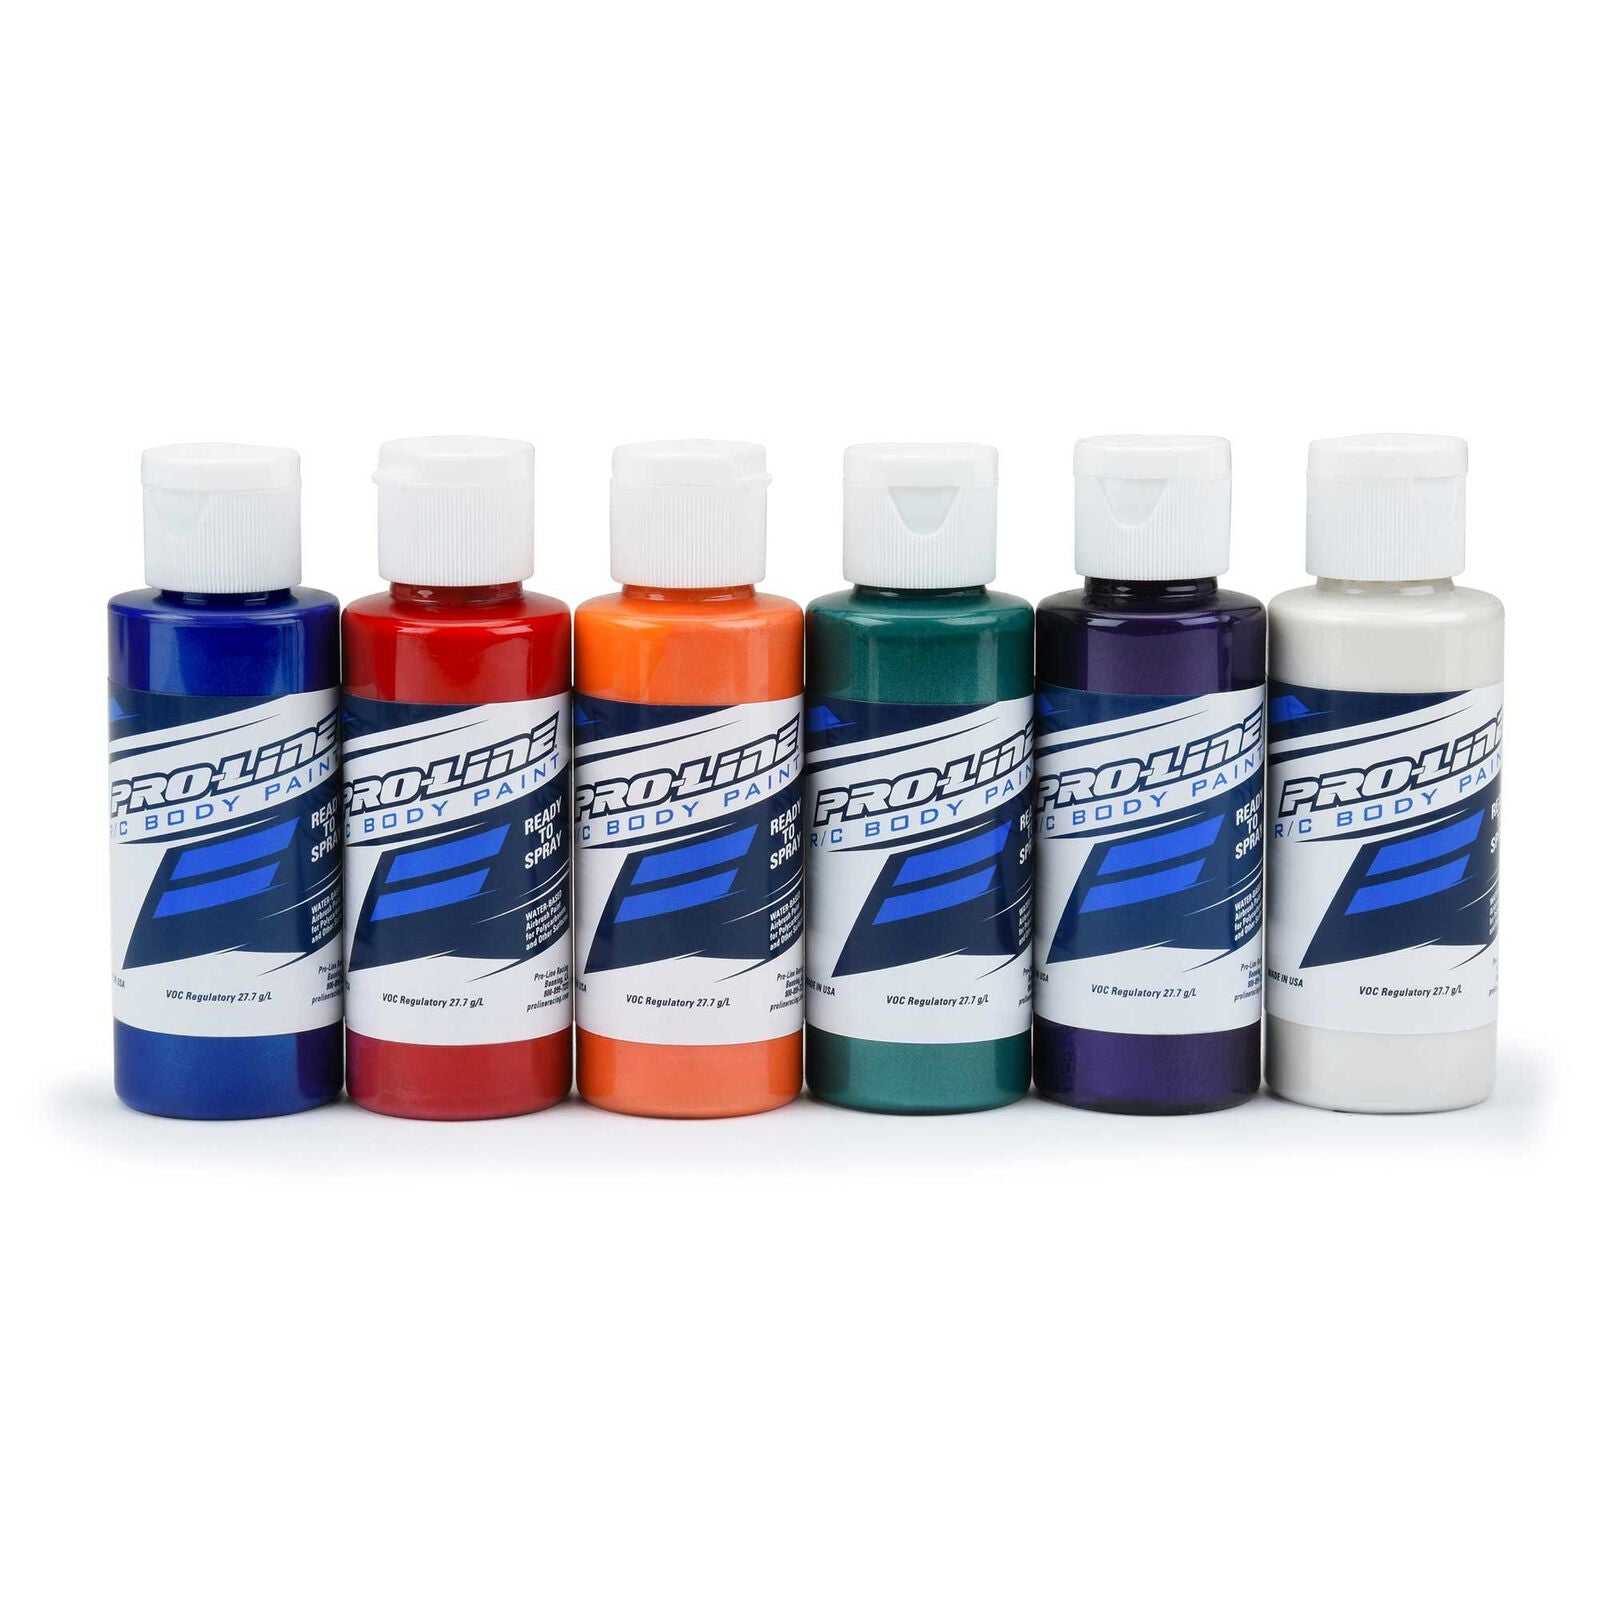 PROLINE 6323-06 Airbrush Paint All Pearl Set